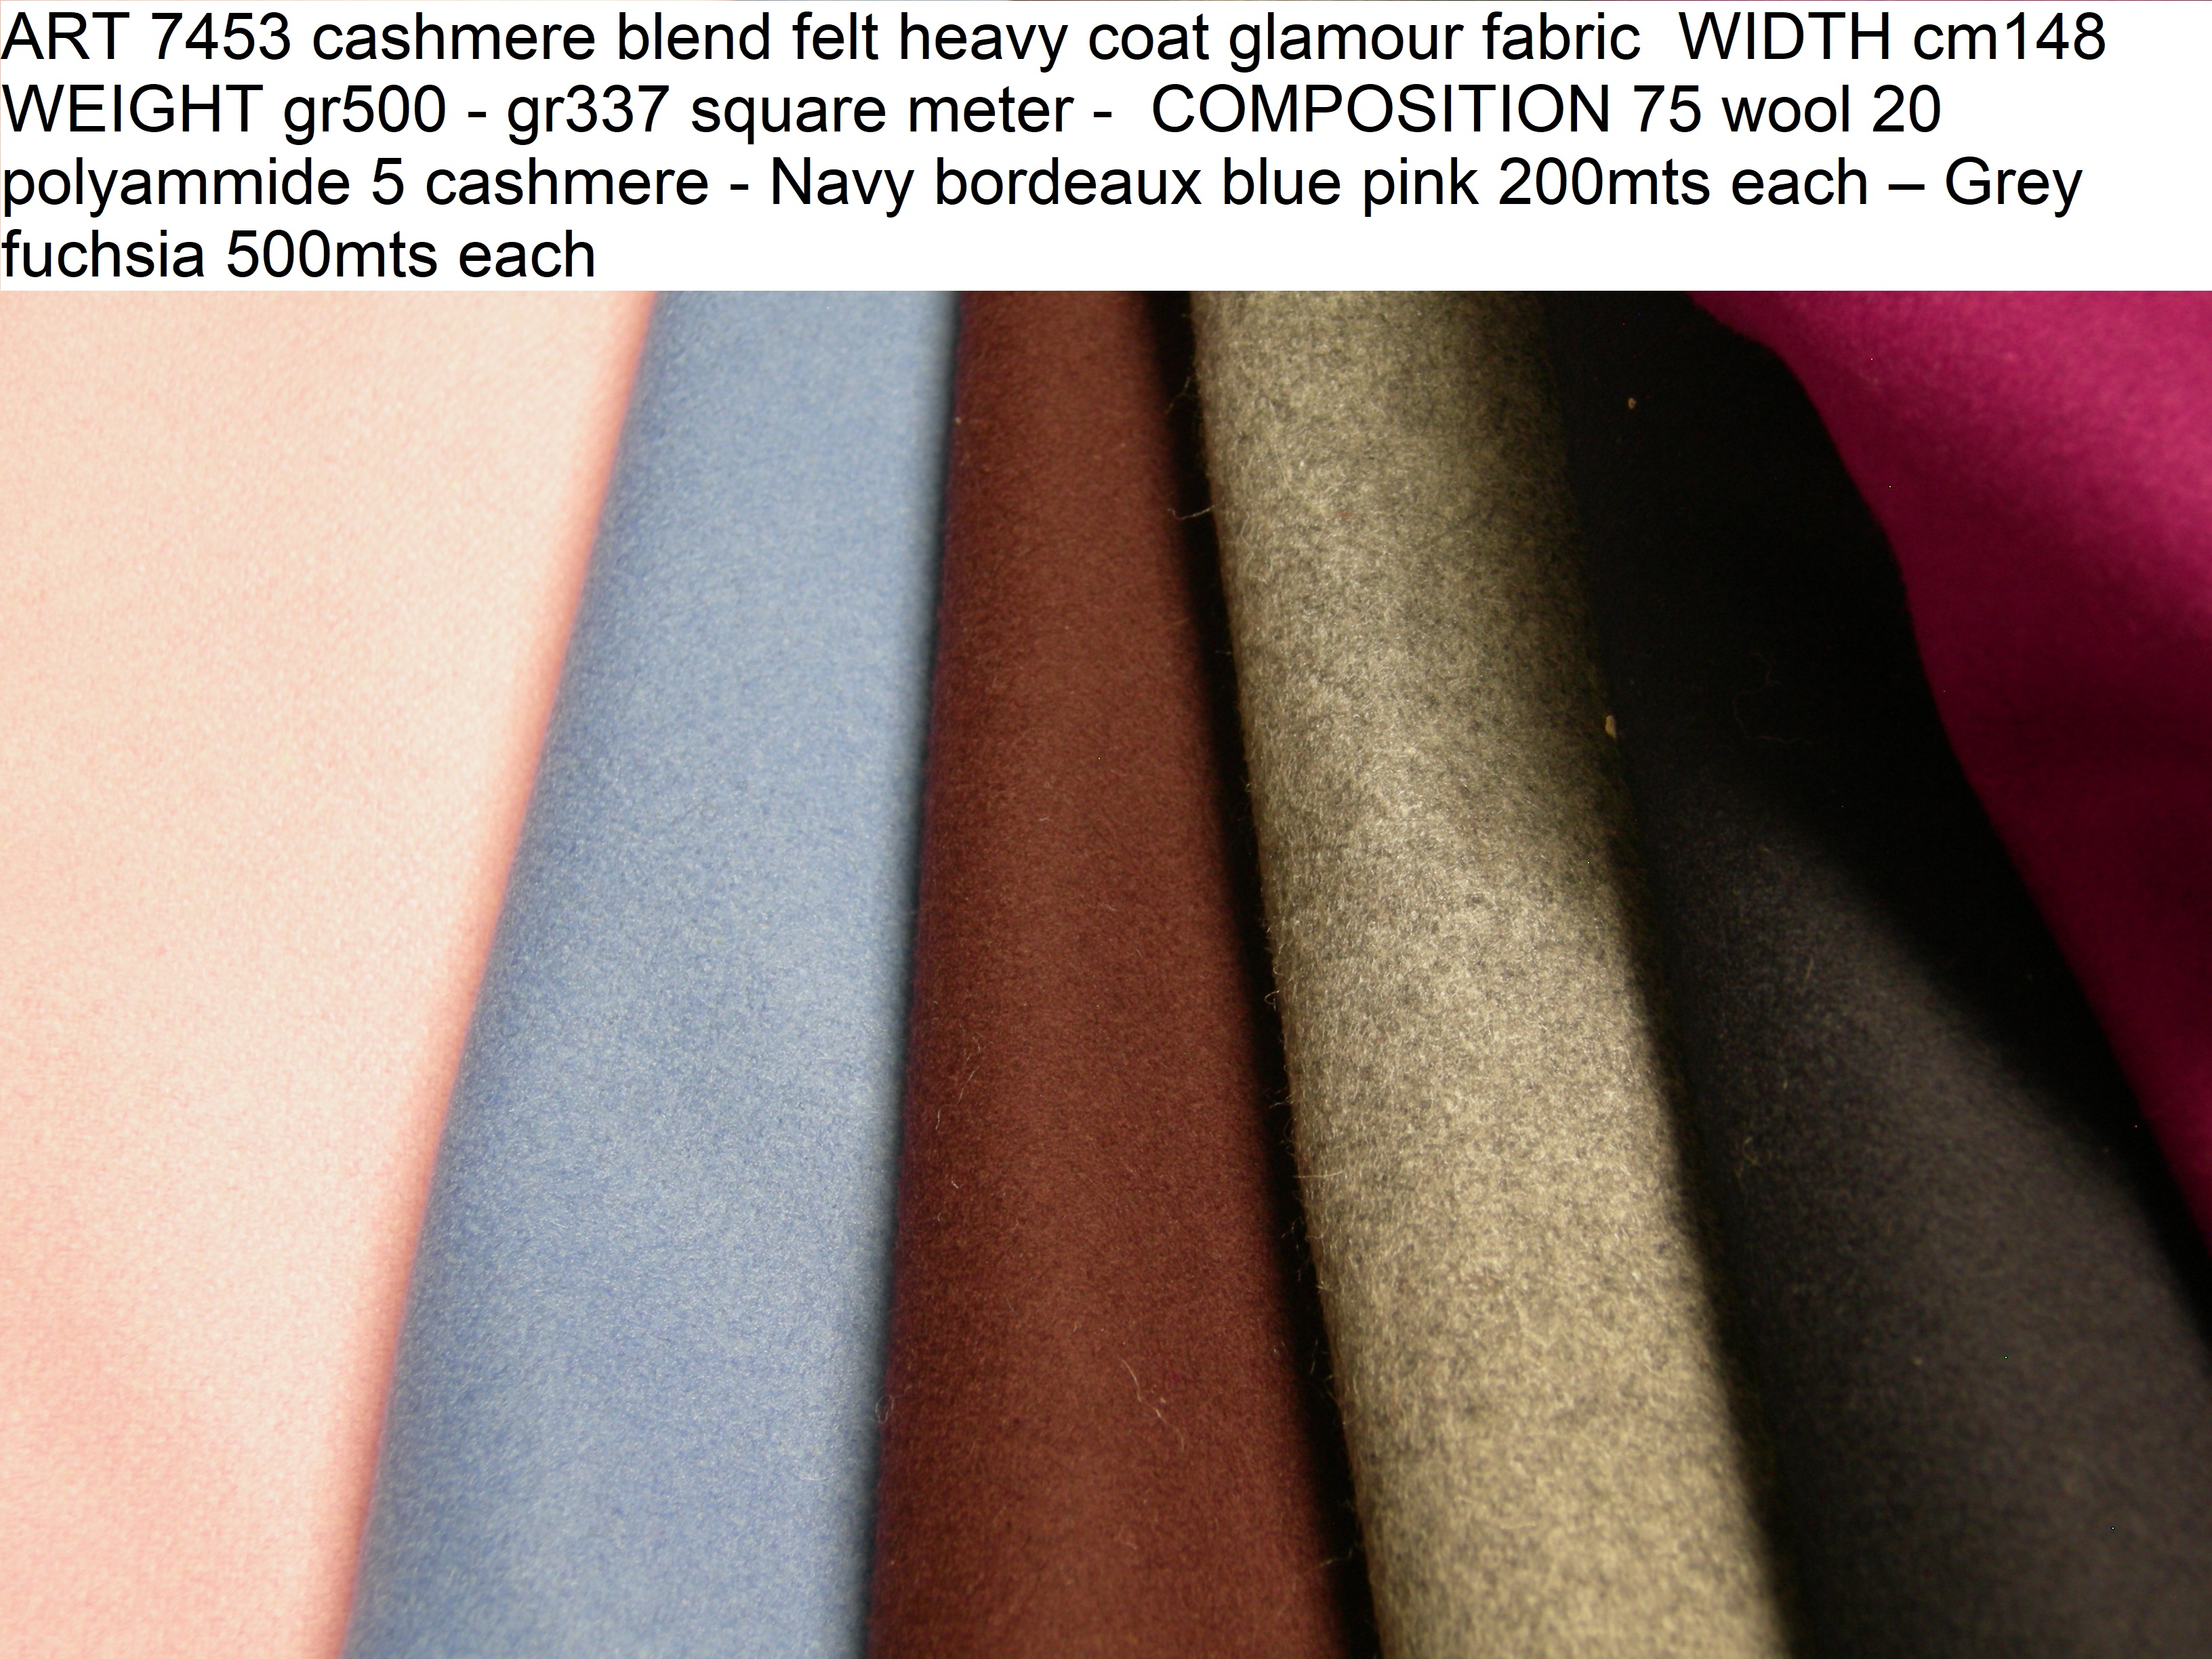 ART 7453 WIDTH cm148 WEIGHT gr500 - gr337 square meter - COMPOSITION 75 wool 20 polyammide 5 cashmere - Navy bordeaux blue pink 200mts each – Grey fuchsia 500mts each